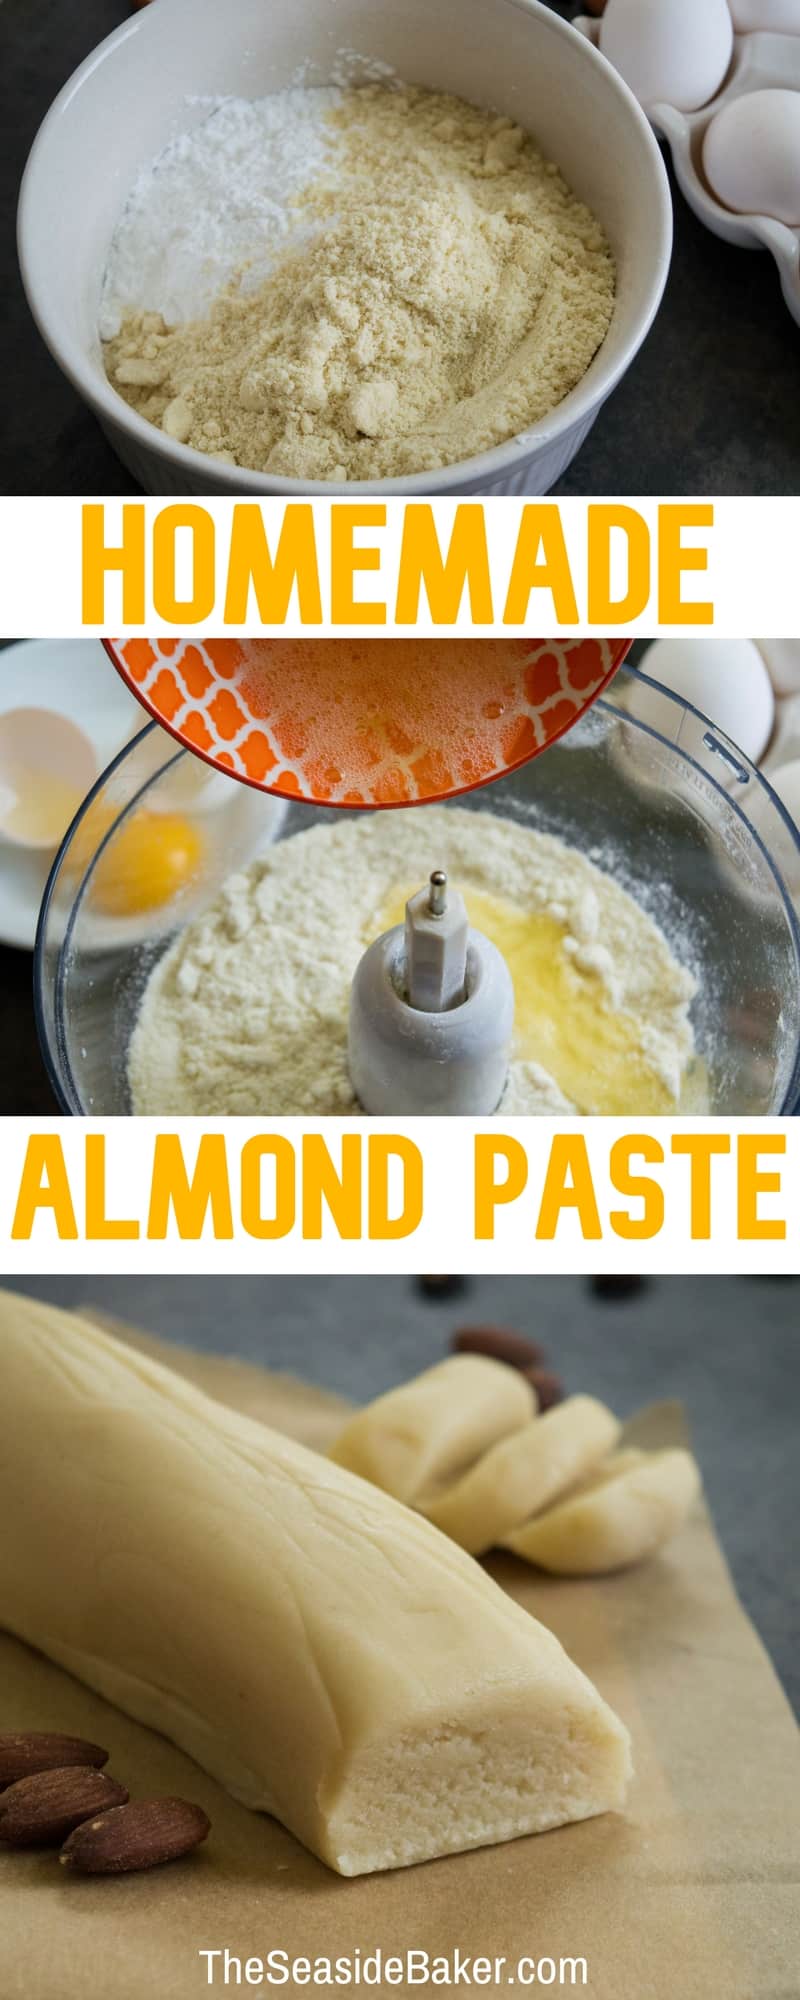 pinterest image collage of homemade almond paste